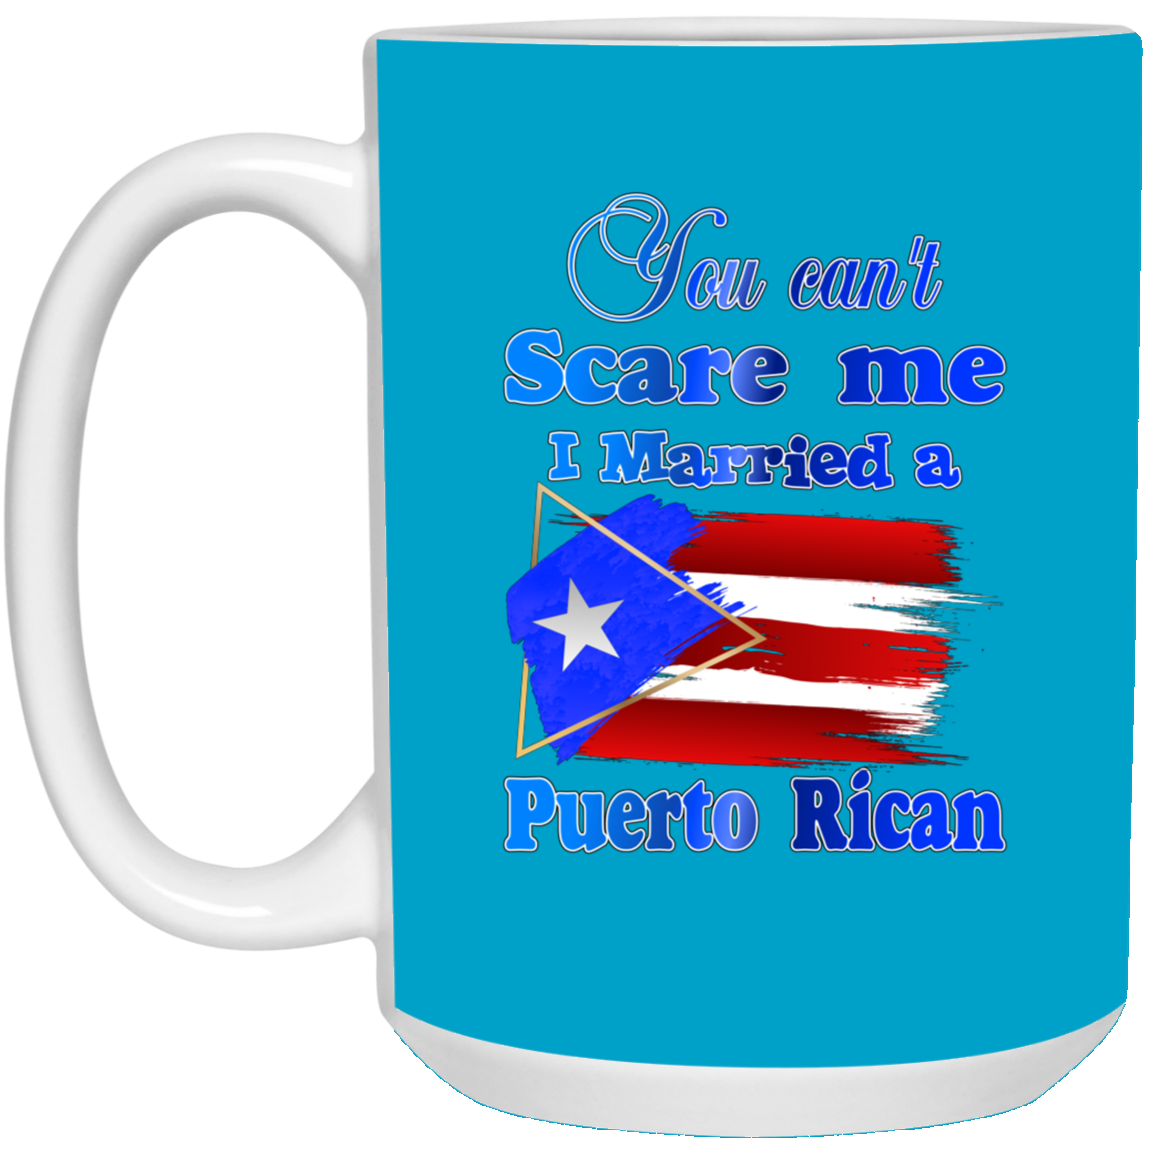 Can't Scare Me, Married PR  15 oz. White Mug